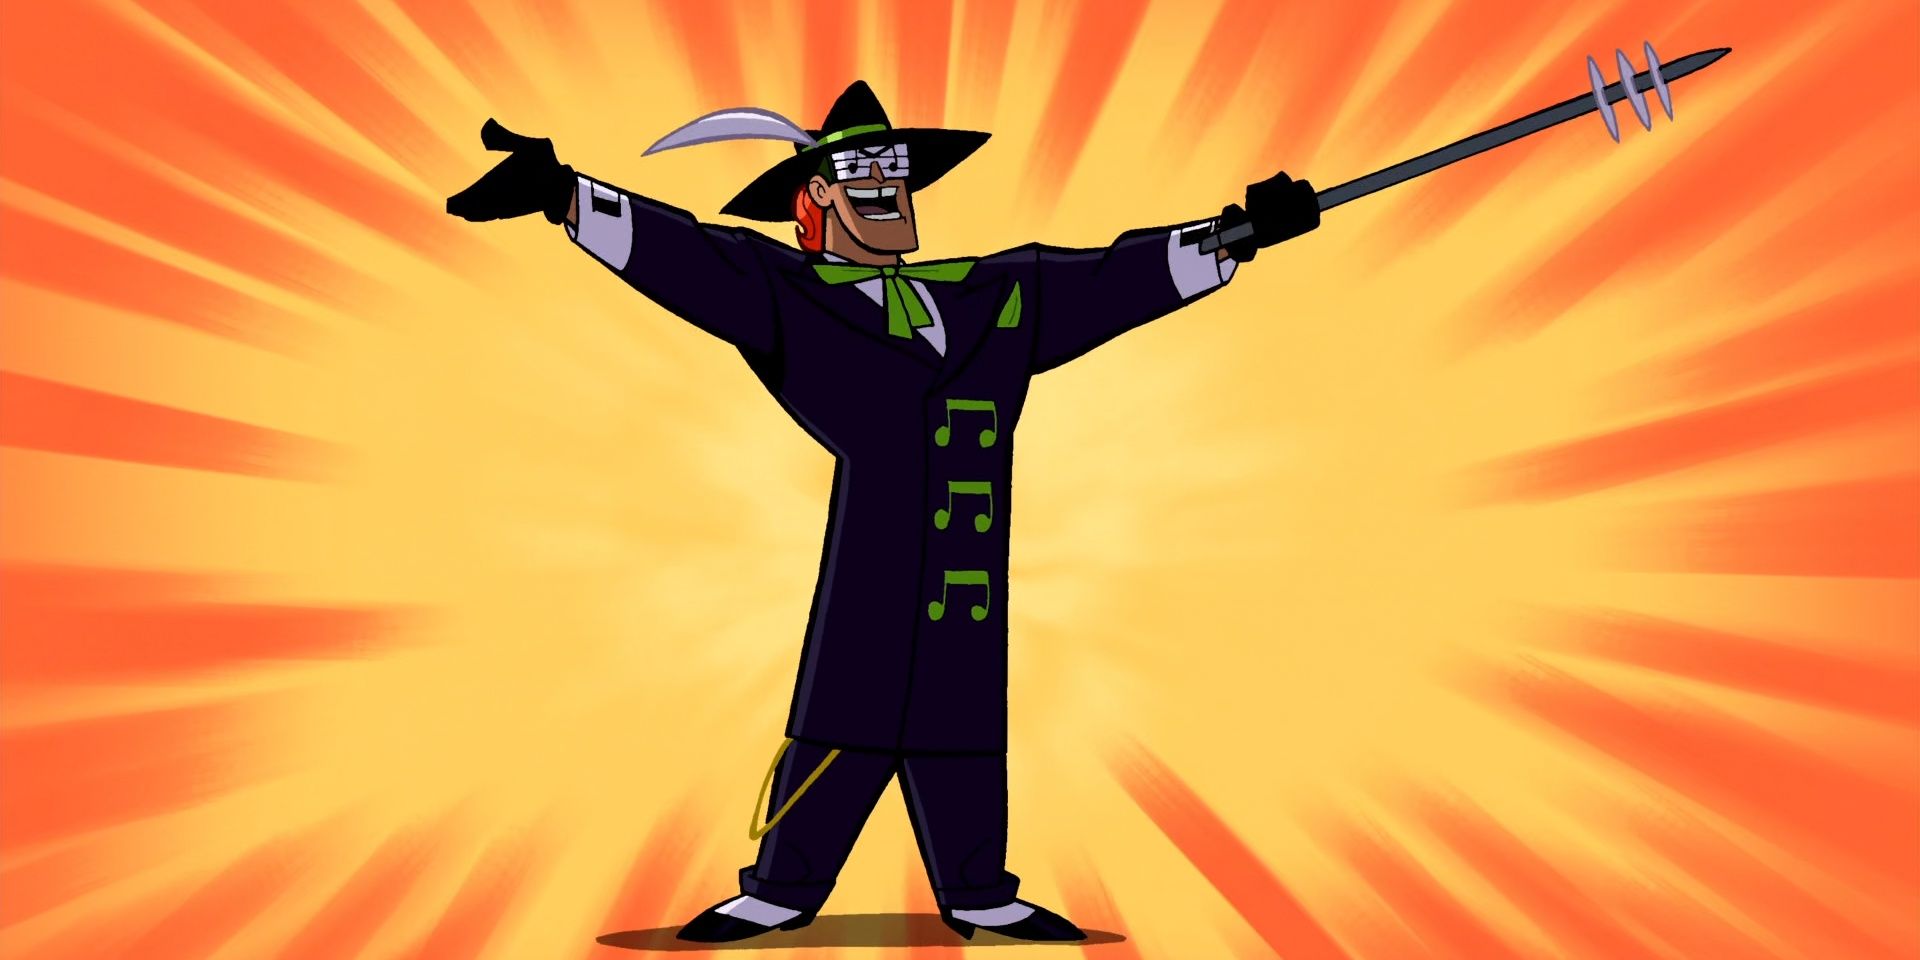 The Music Meister in Batman: The Brave and the Bold